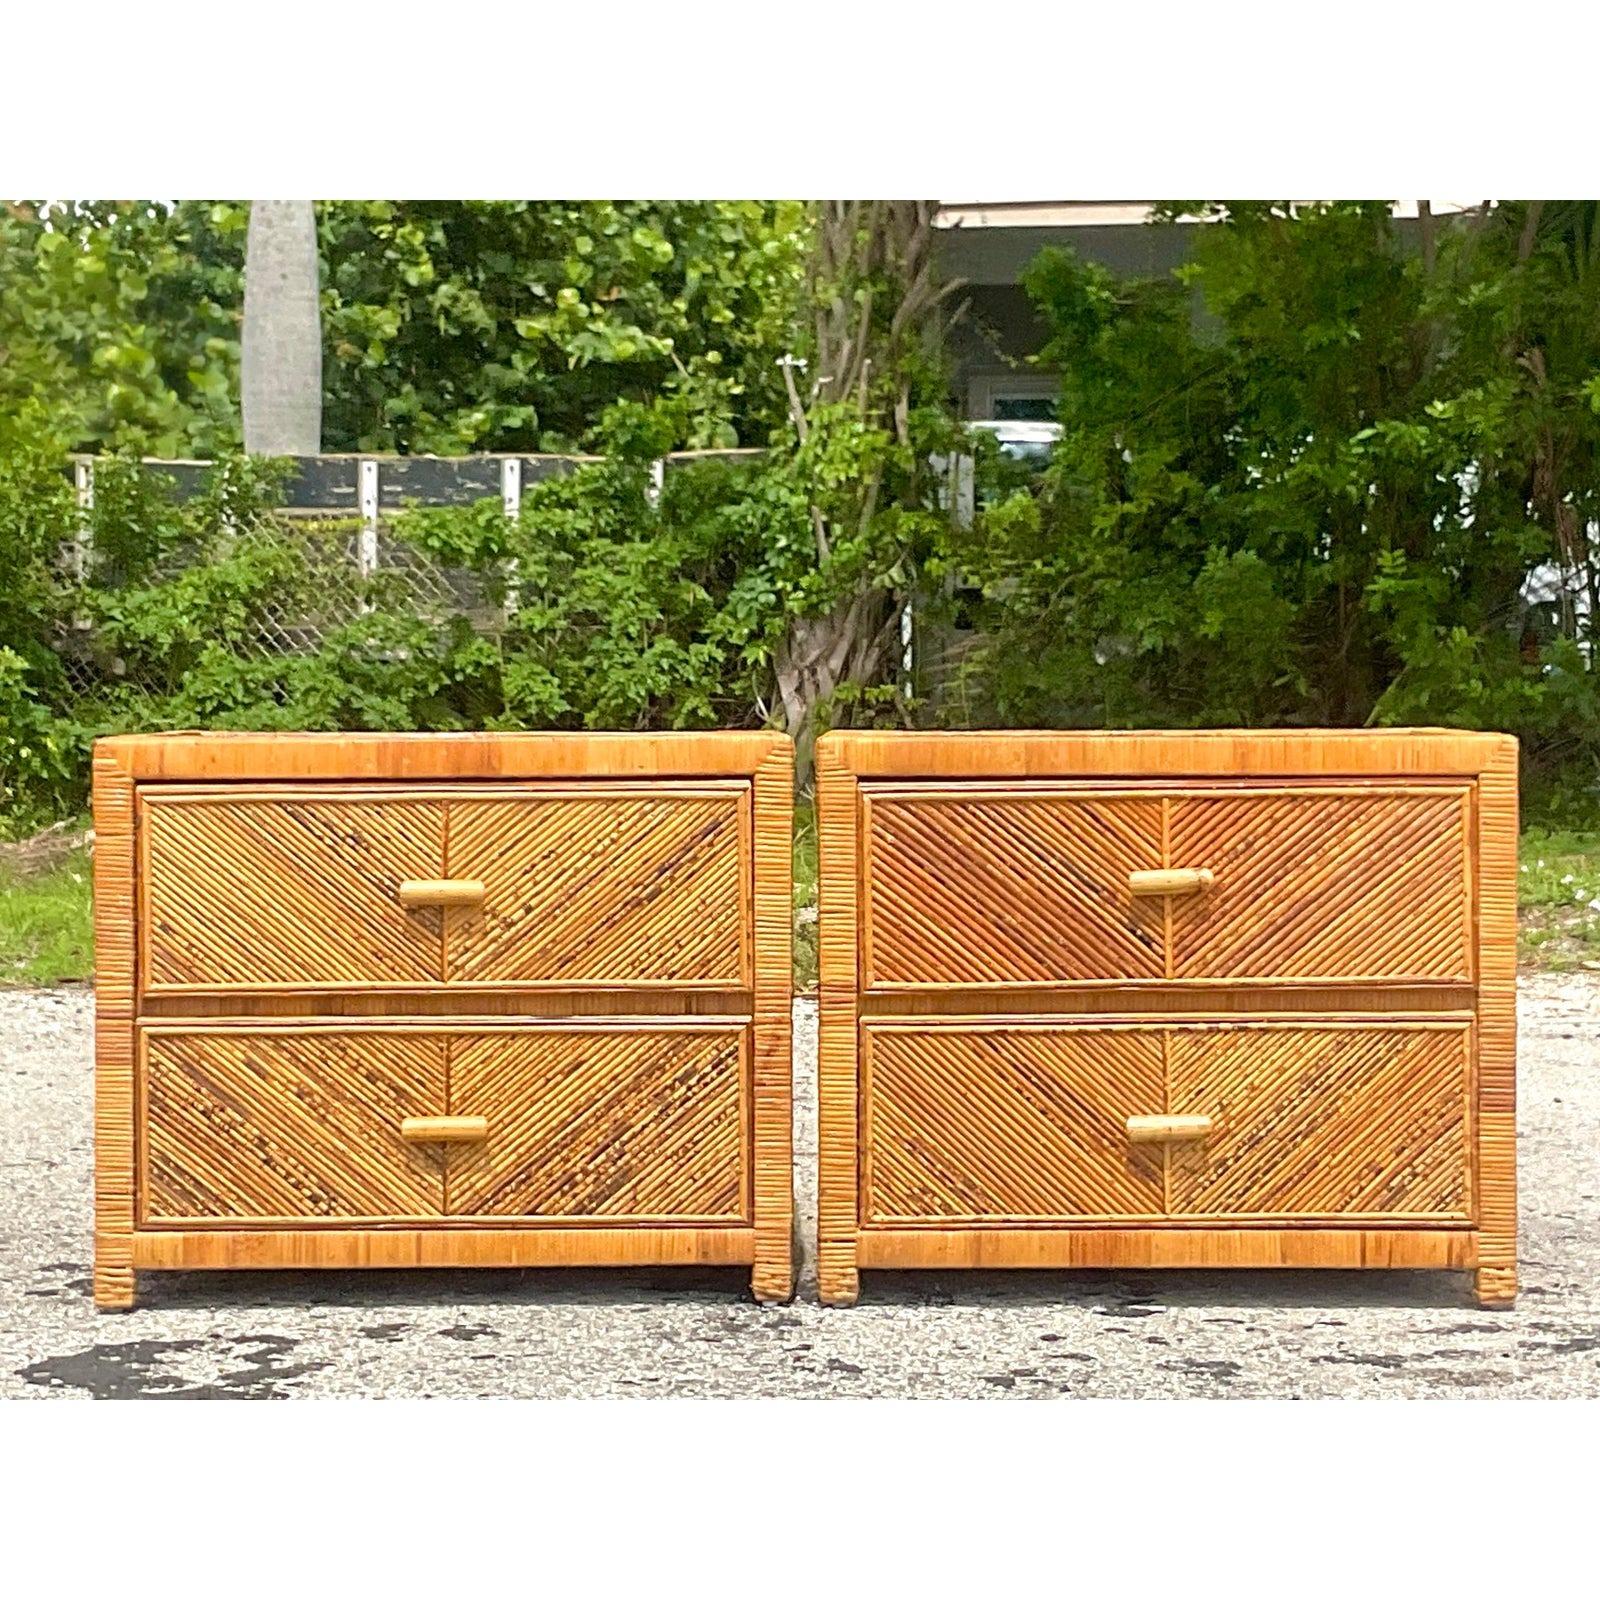 Philippine Late 20th Century Vintage Coastal Chevron Pencil Reed Nightstands - a Pair